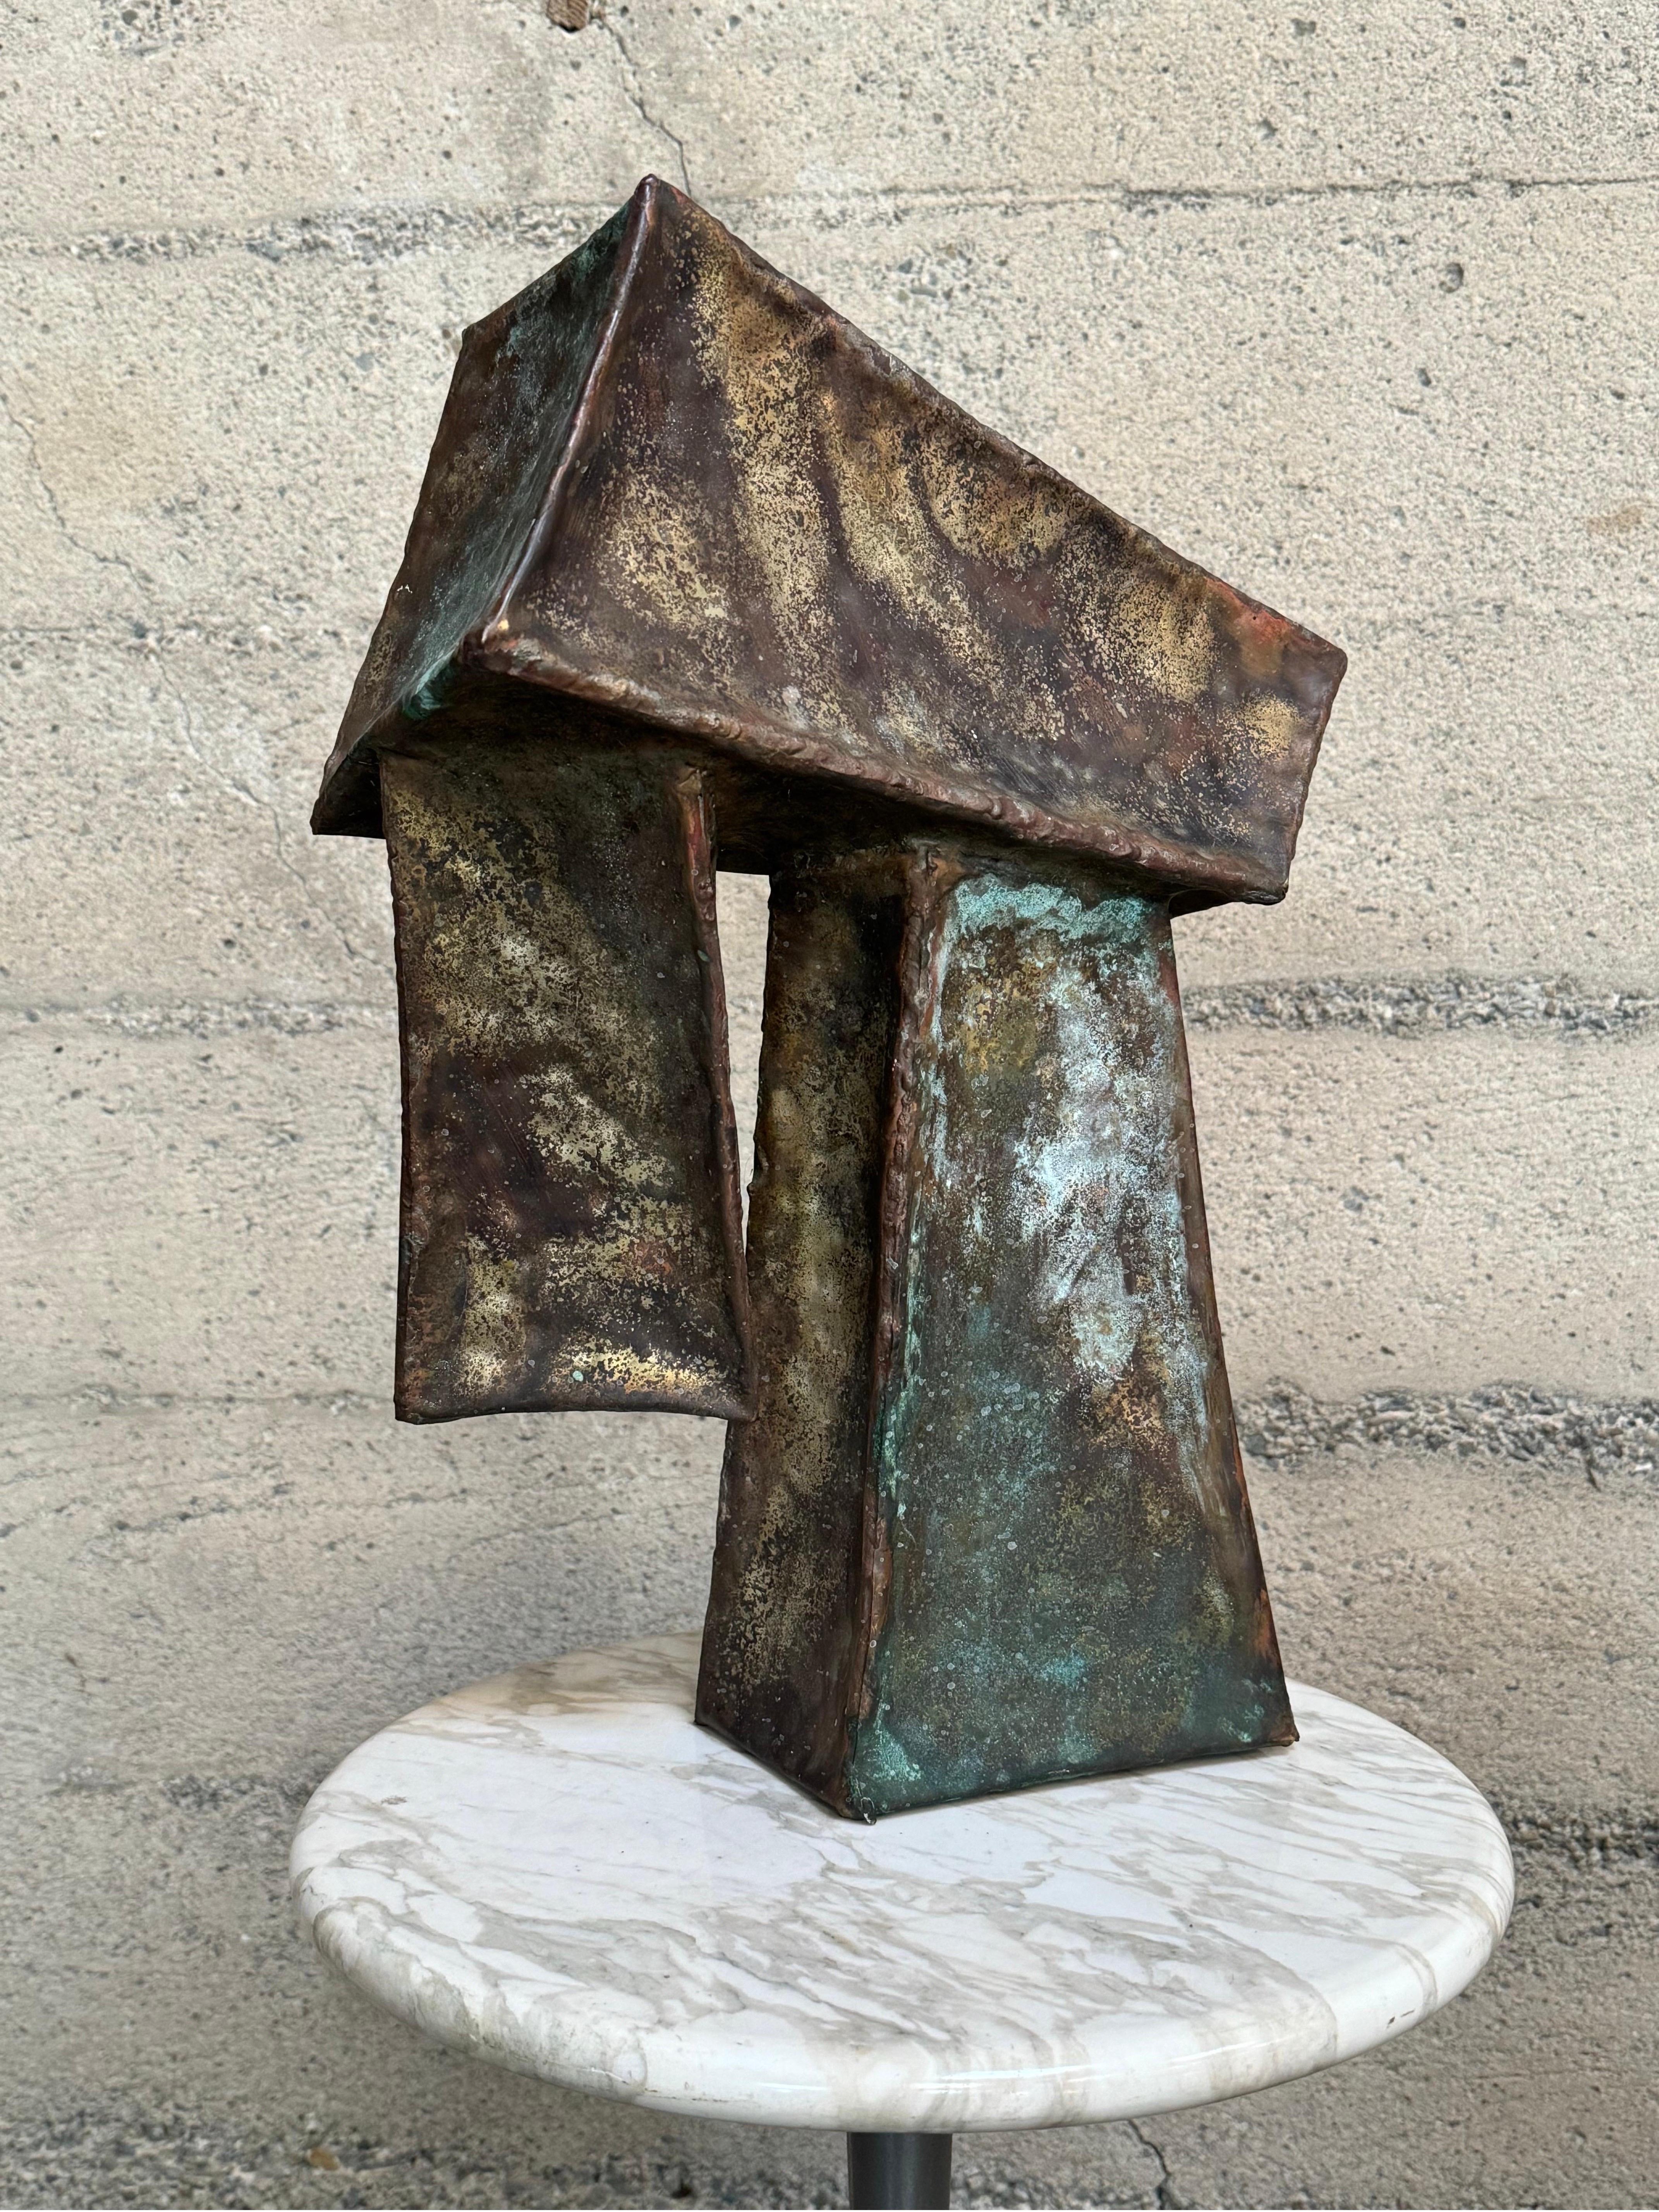 1970s Brutalist abstract sculpture constructed of welded metal with a rich patina to it. Consisting of 3 boxy angular forms welded in opposing angles and directions, there is texture to the metal surface along with contrasting colors to the patina,